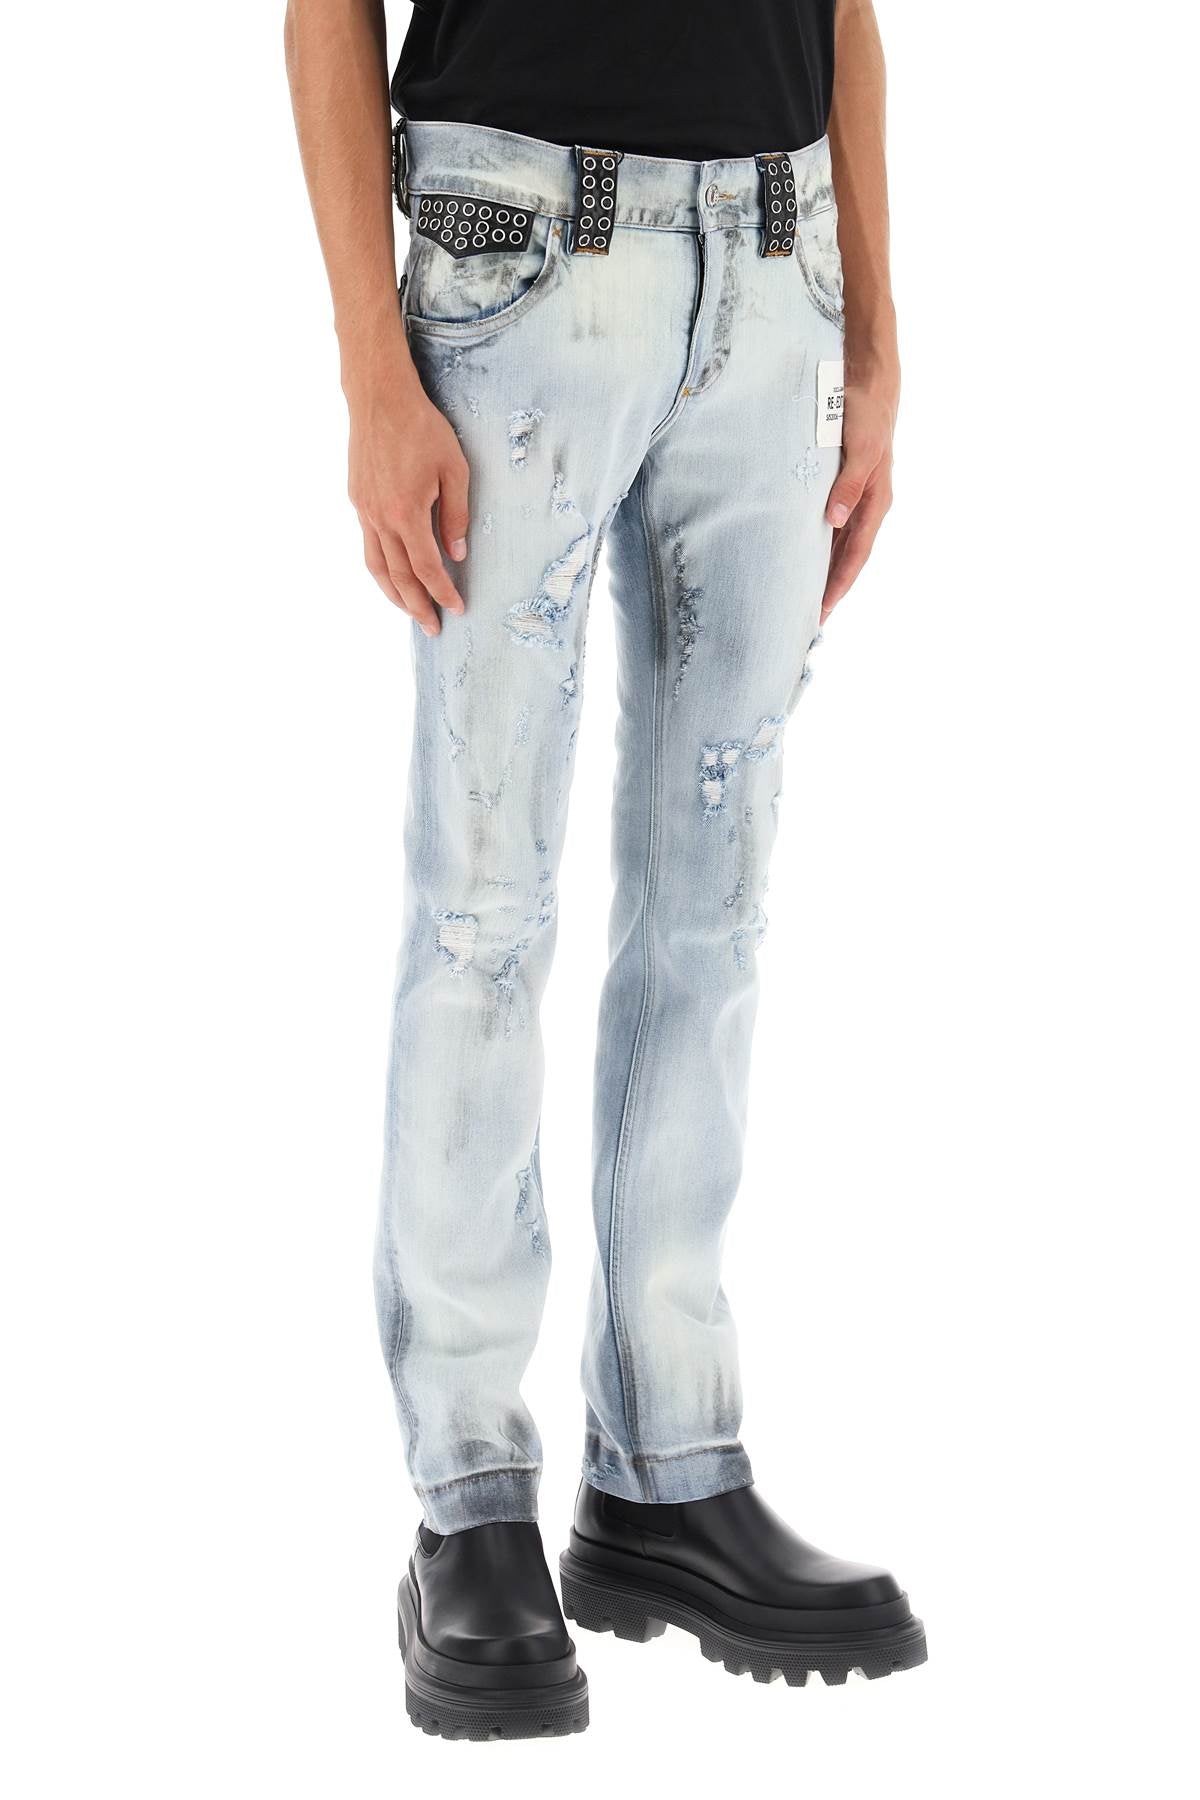 Dolce & Gabbana Dolce & gabbana re-edition jeans with leather detailing